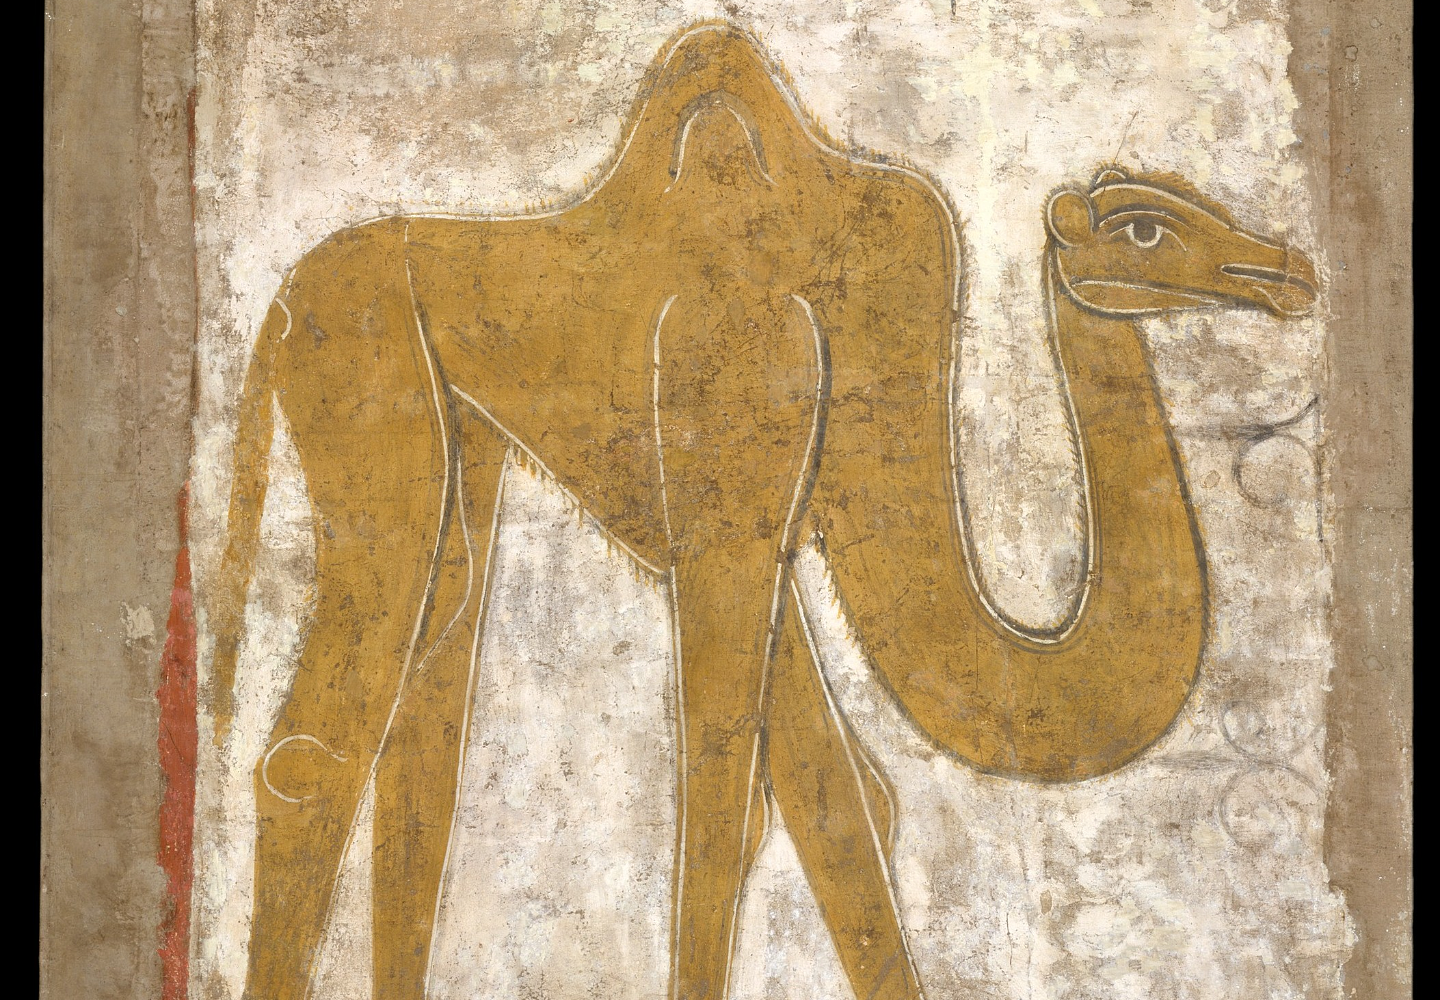 Insider Insights: The Camel at The Cloisters